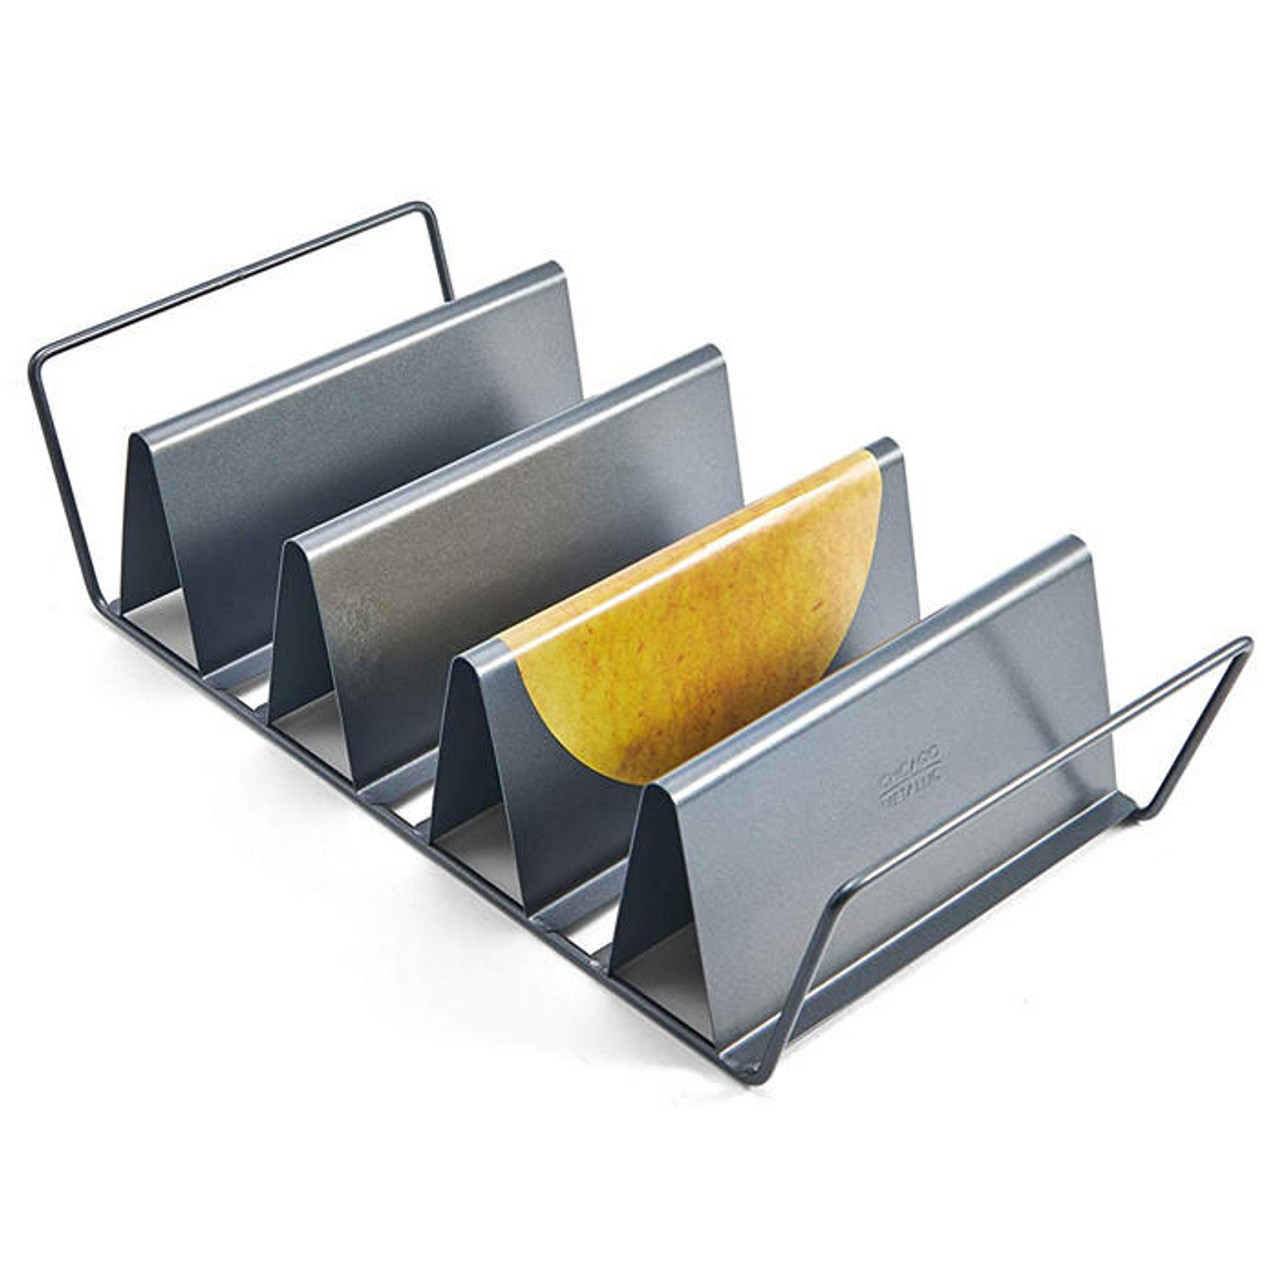 Taco Holder Plates Taco Accessories Taco Shell Mold For Frying Taco Bar  Serving Dishes Stainless Steel Tray With Sauce Bowl